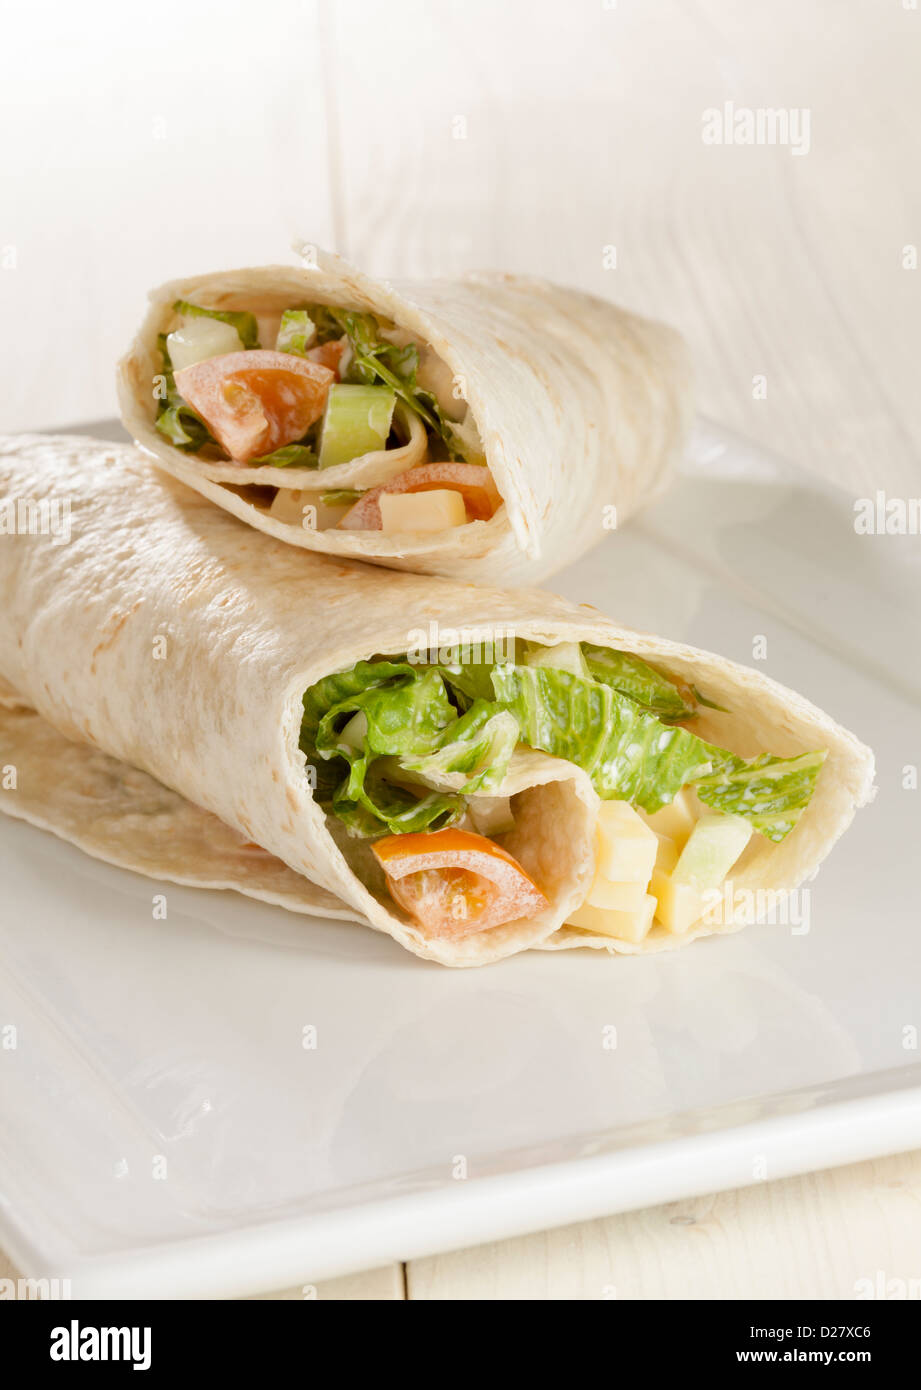 Tortilla wraps filled with salad Stock Photo